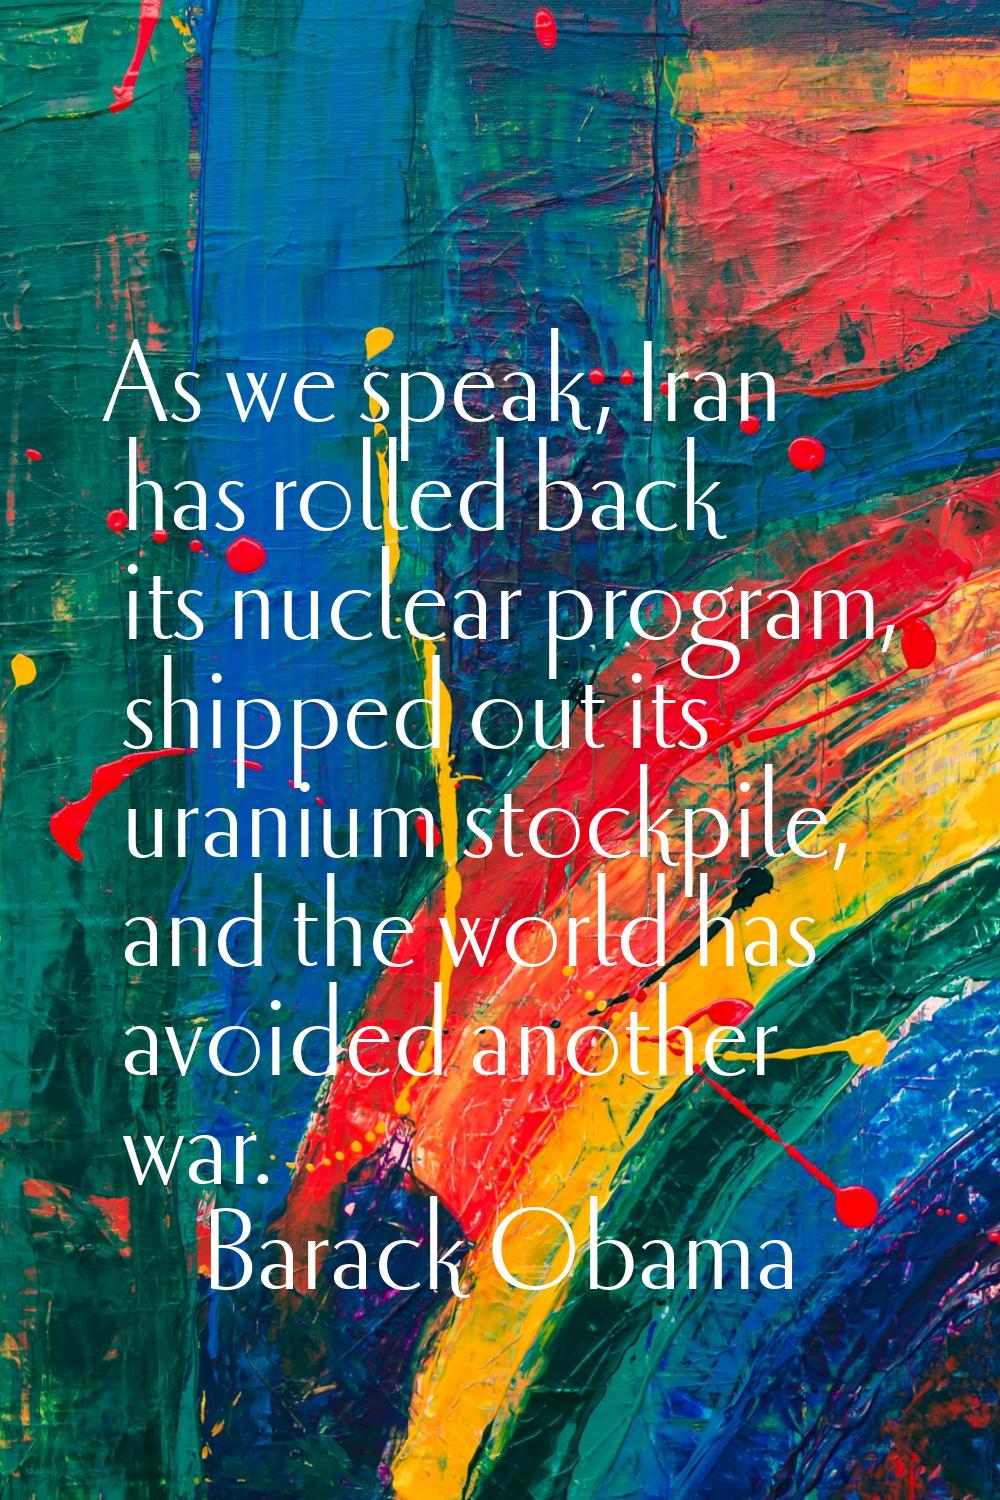 As we speak, Iran has rolled back its nuclear program, shipped out its uranium stockpile, and the w